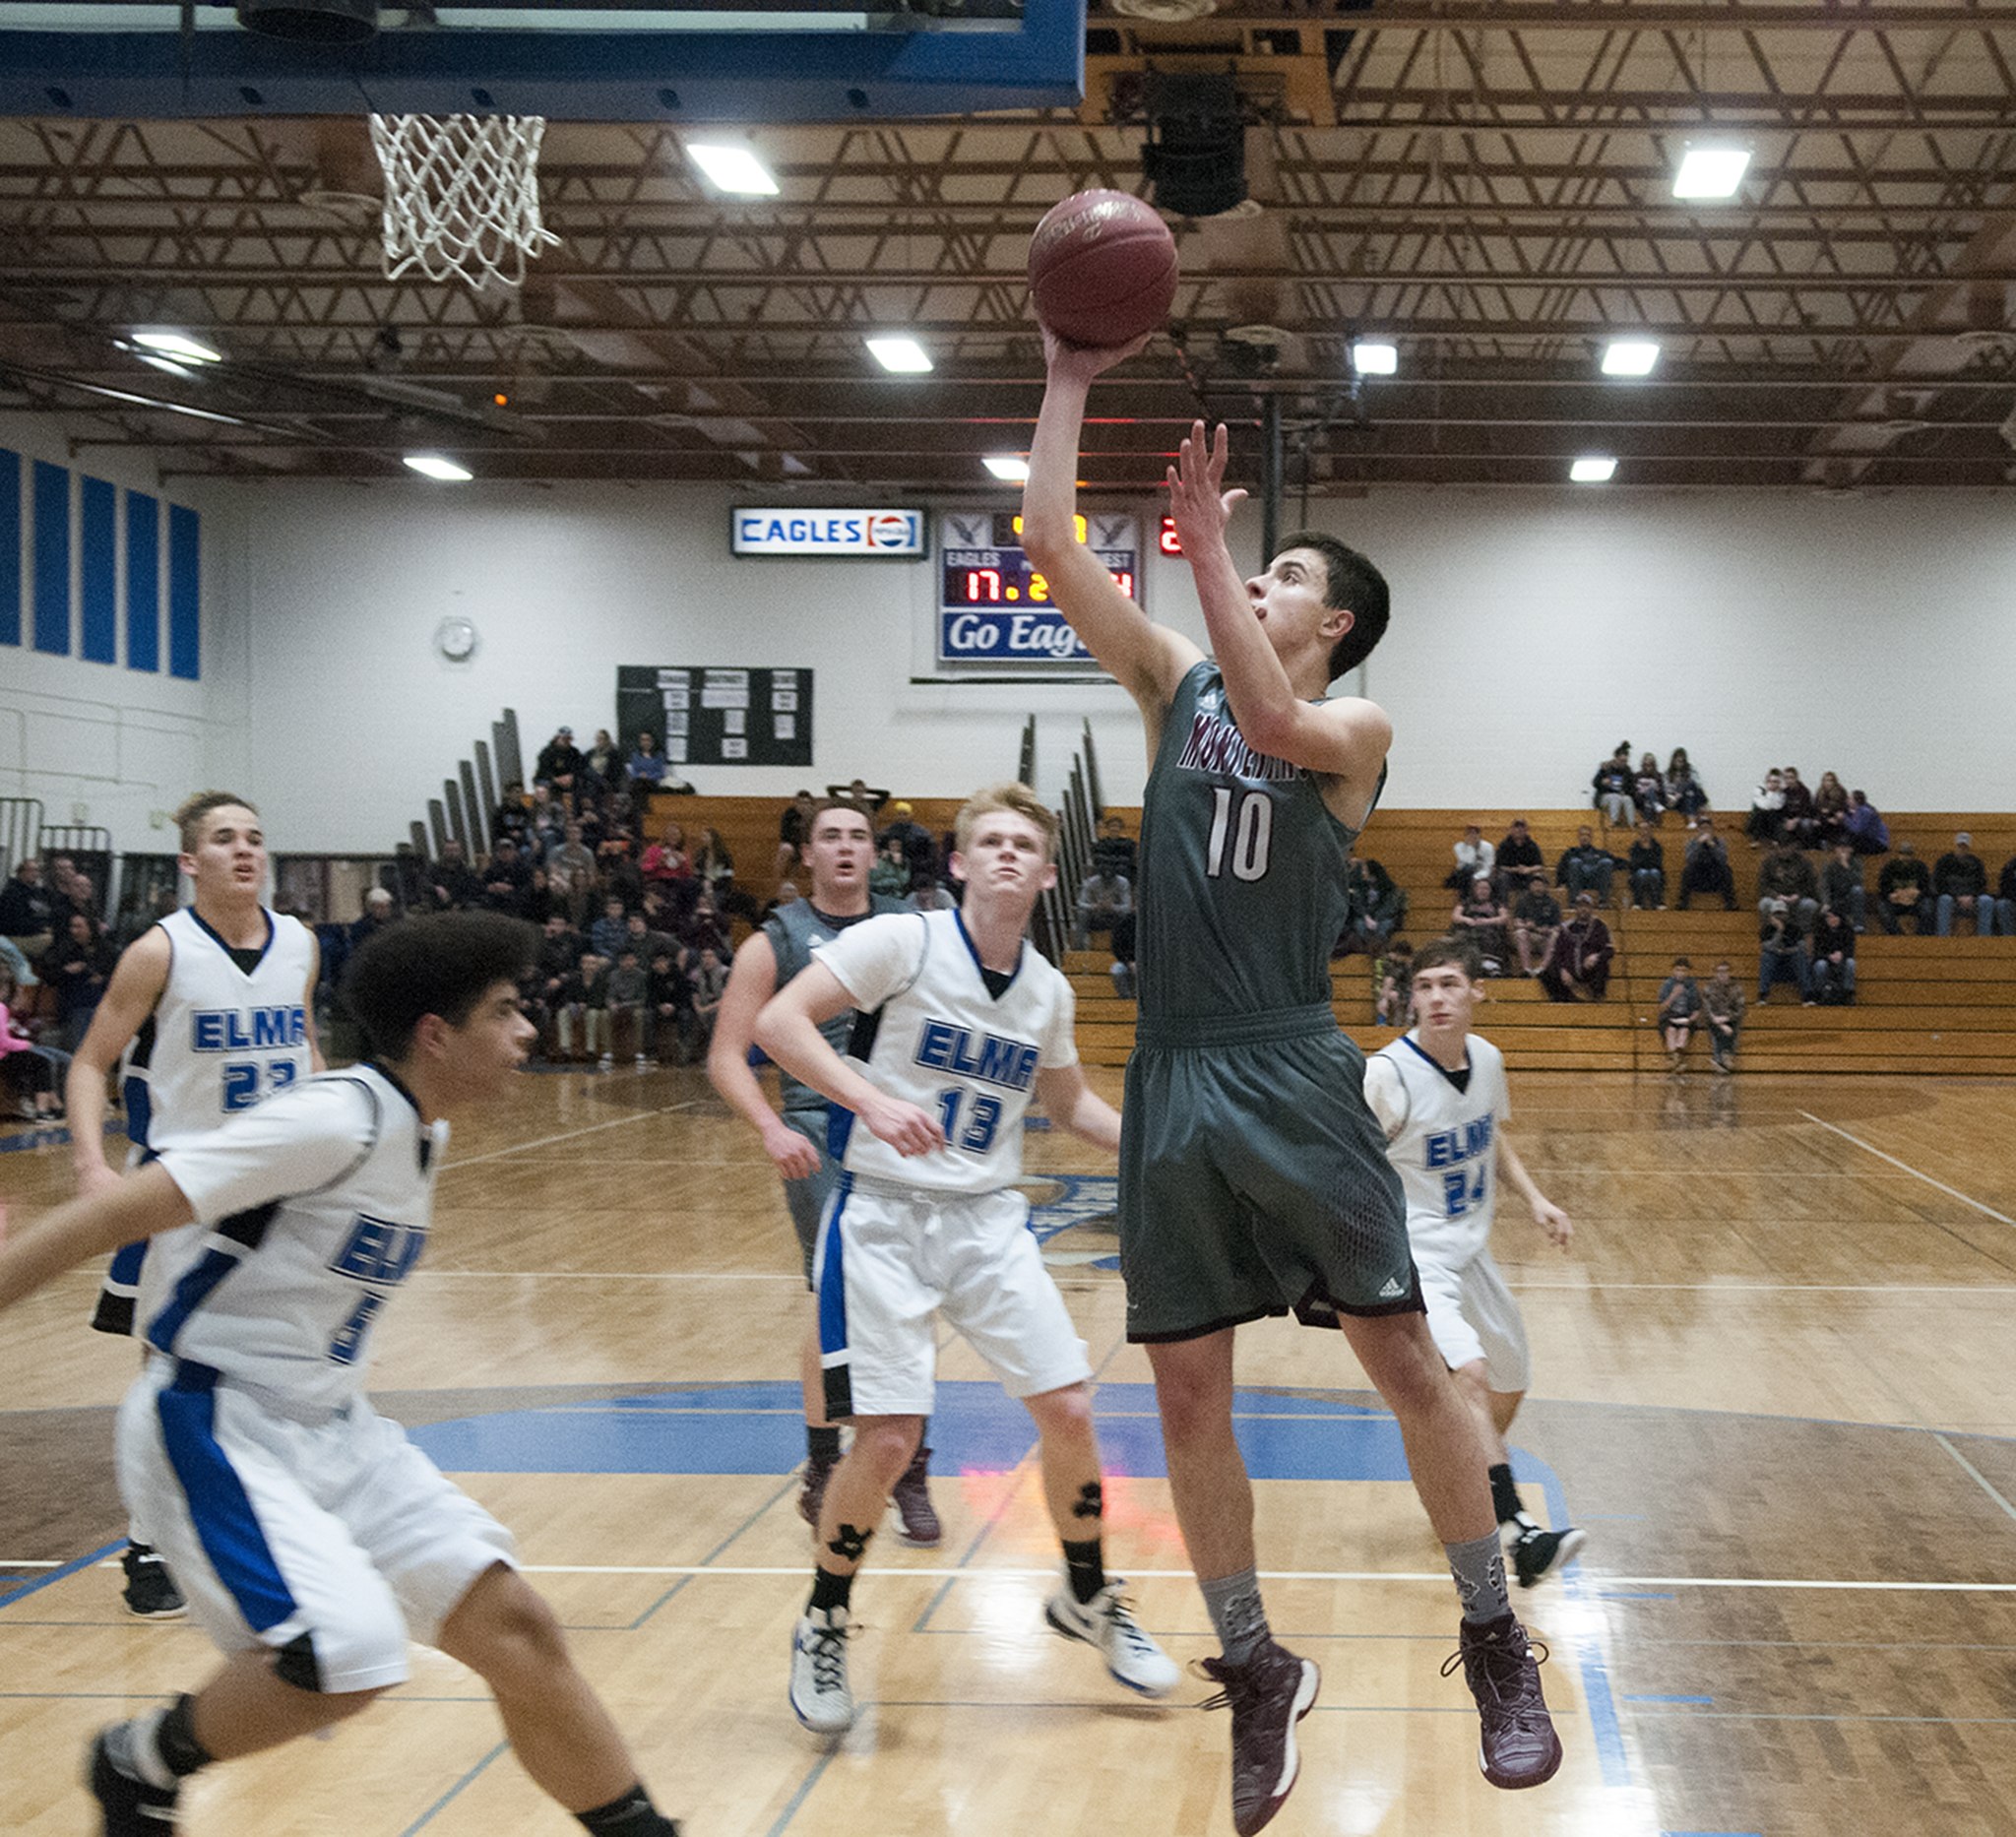 (Brendan Carl | The Daily World)                                Montesano’s Trevor Ridgway puts up a layup against Elma in an Evergreen 1A League game at Elma on Wednesday.